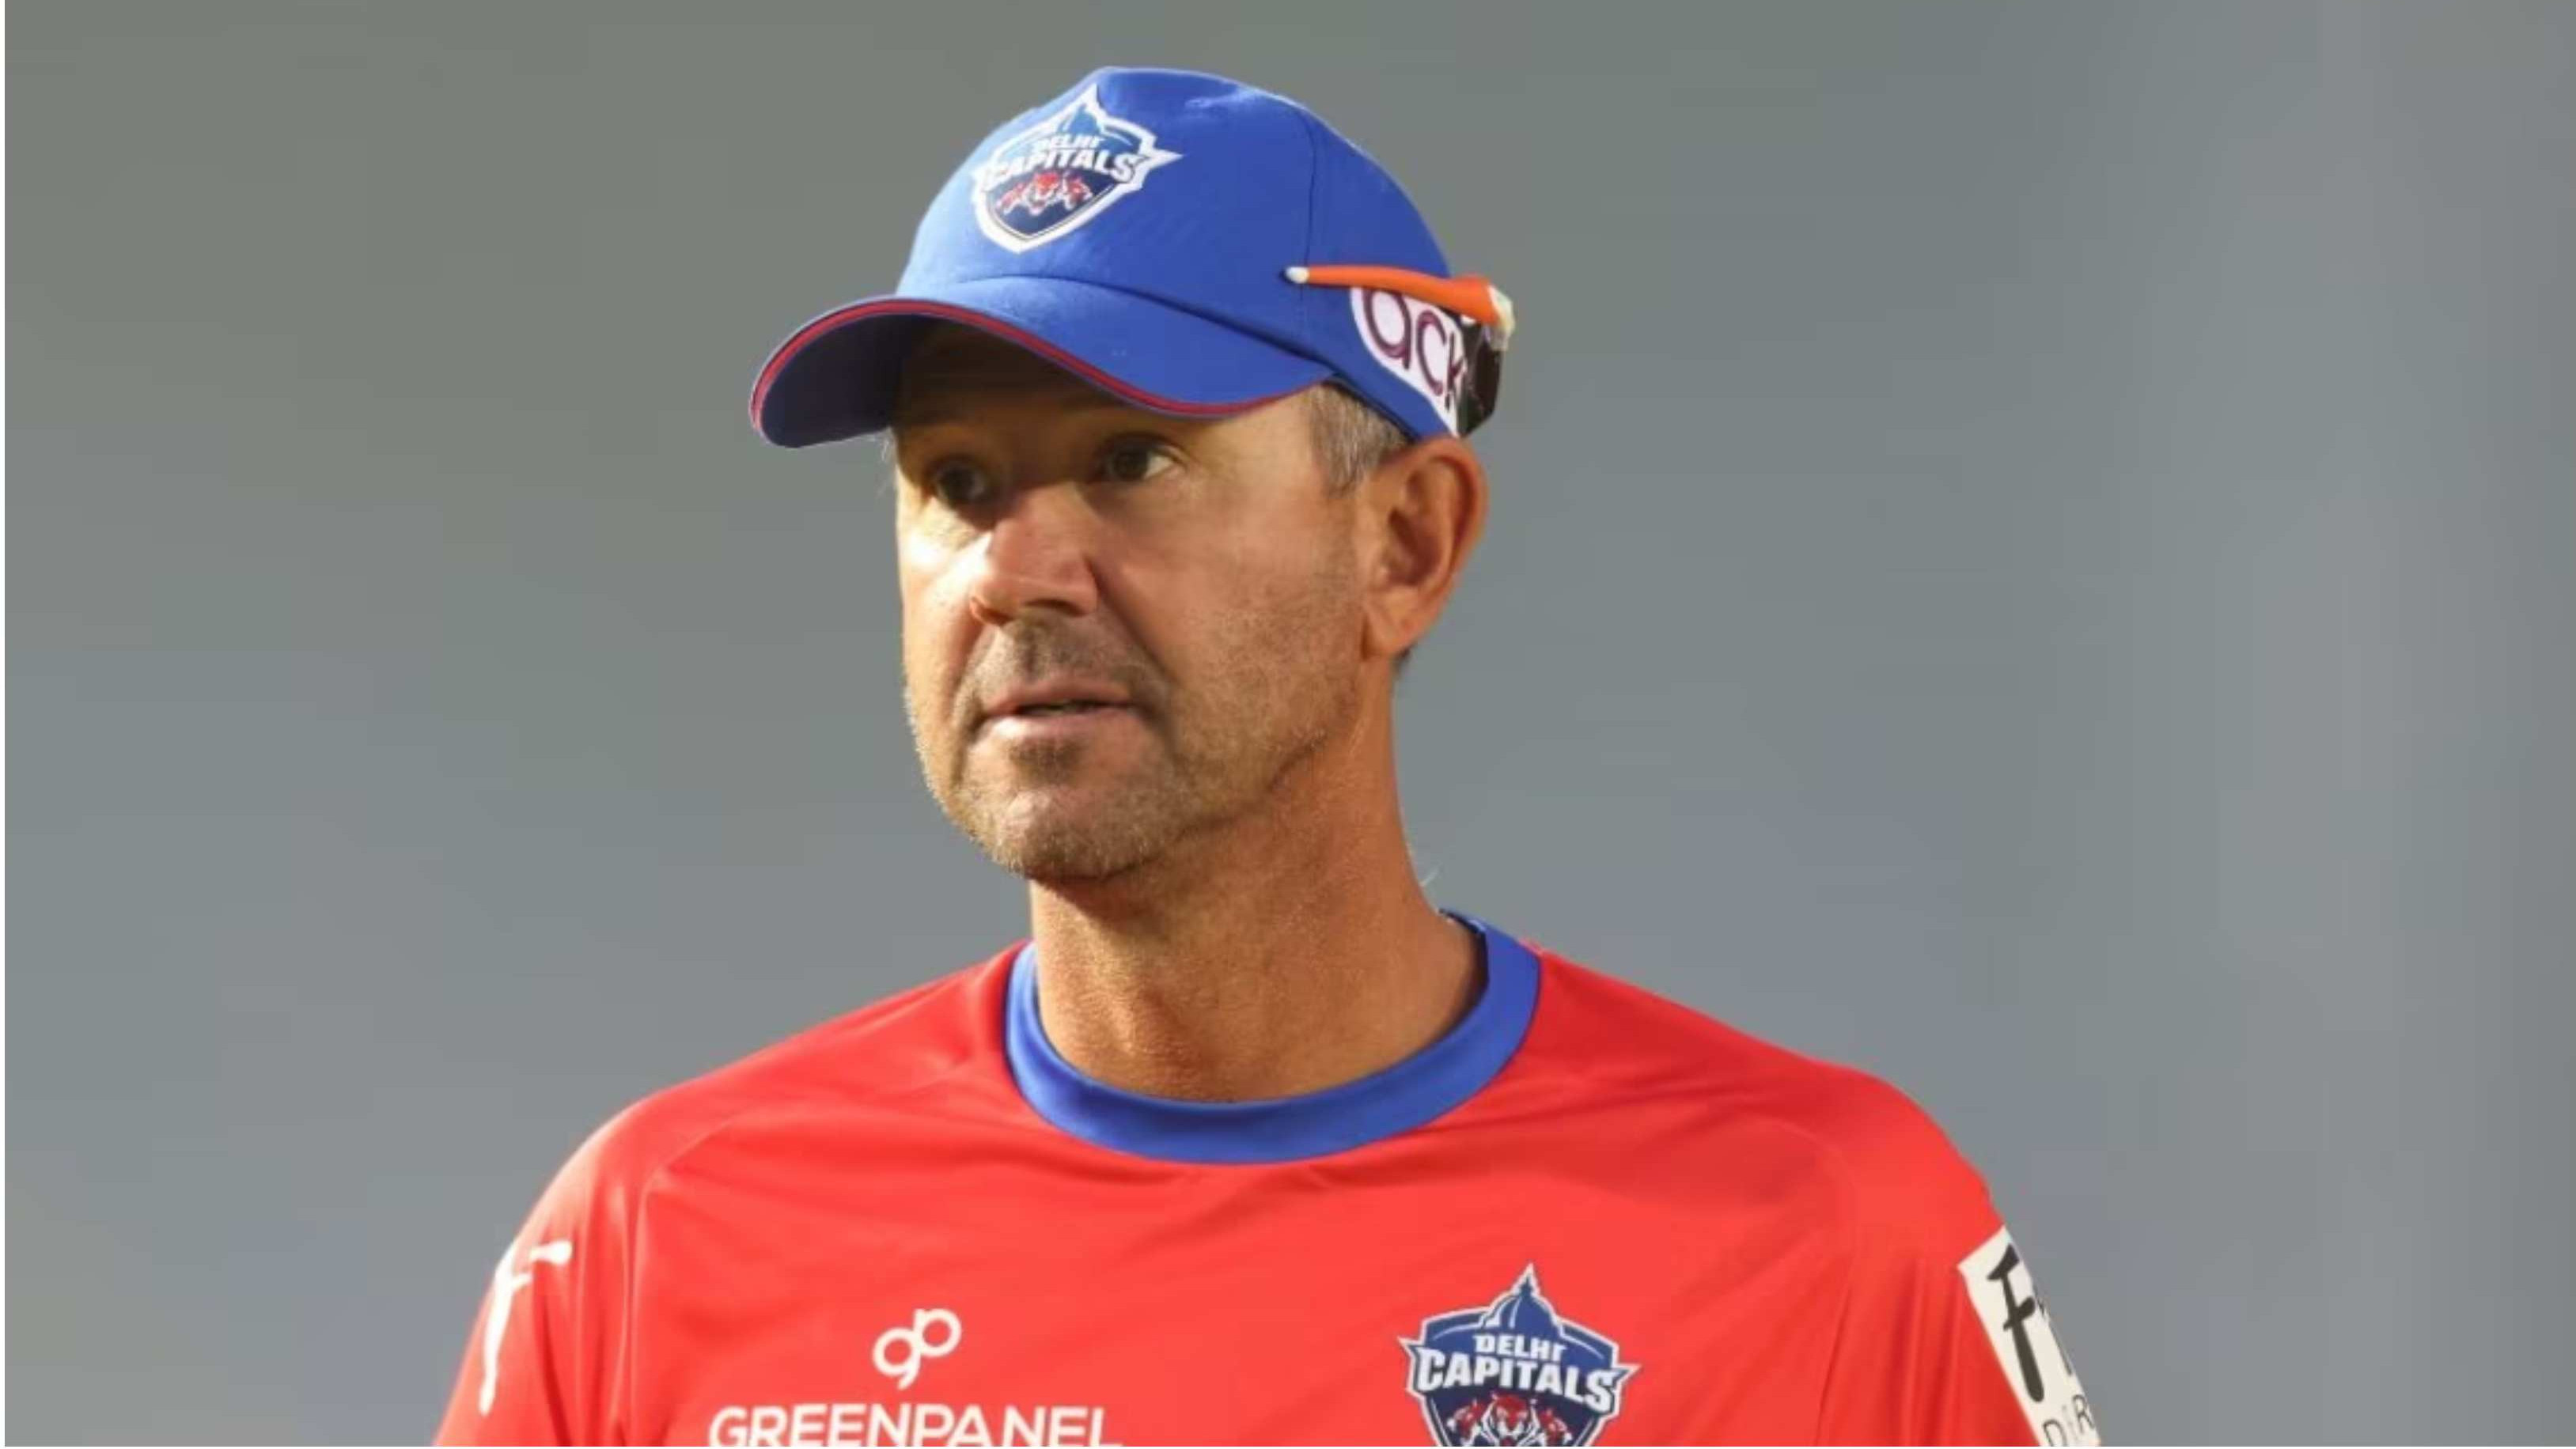 Ricky Ponting on BCCI’s radar for India head coach job but ‘three-year’ contract a big concern: Report